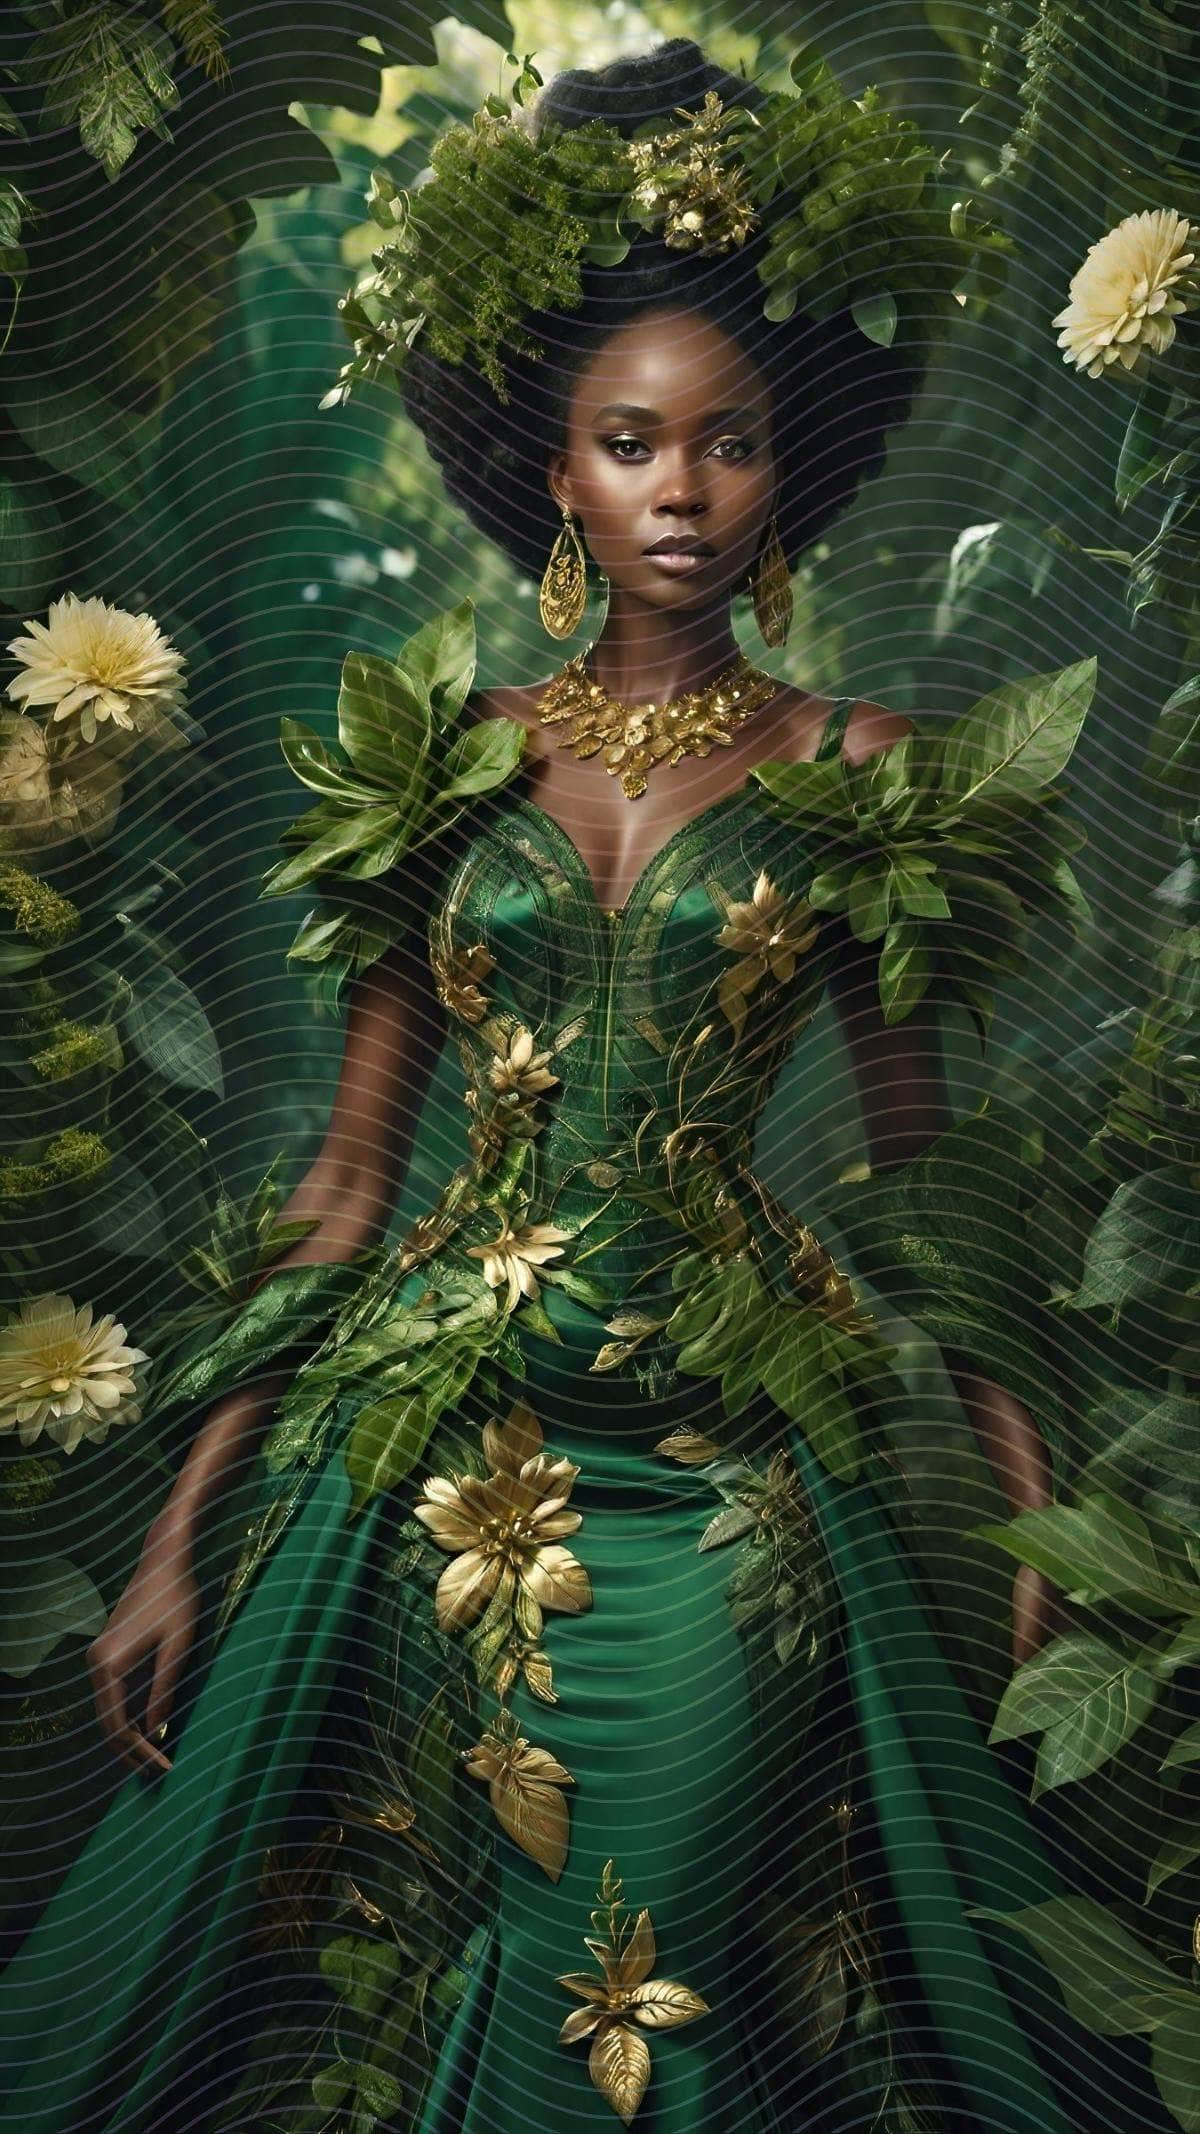 Portrait Of An African Woman In An Intricate Fantasy Dress